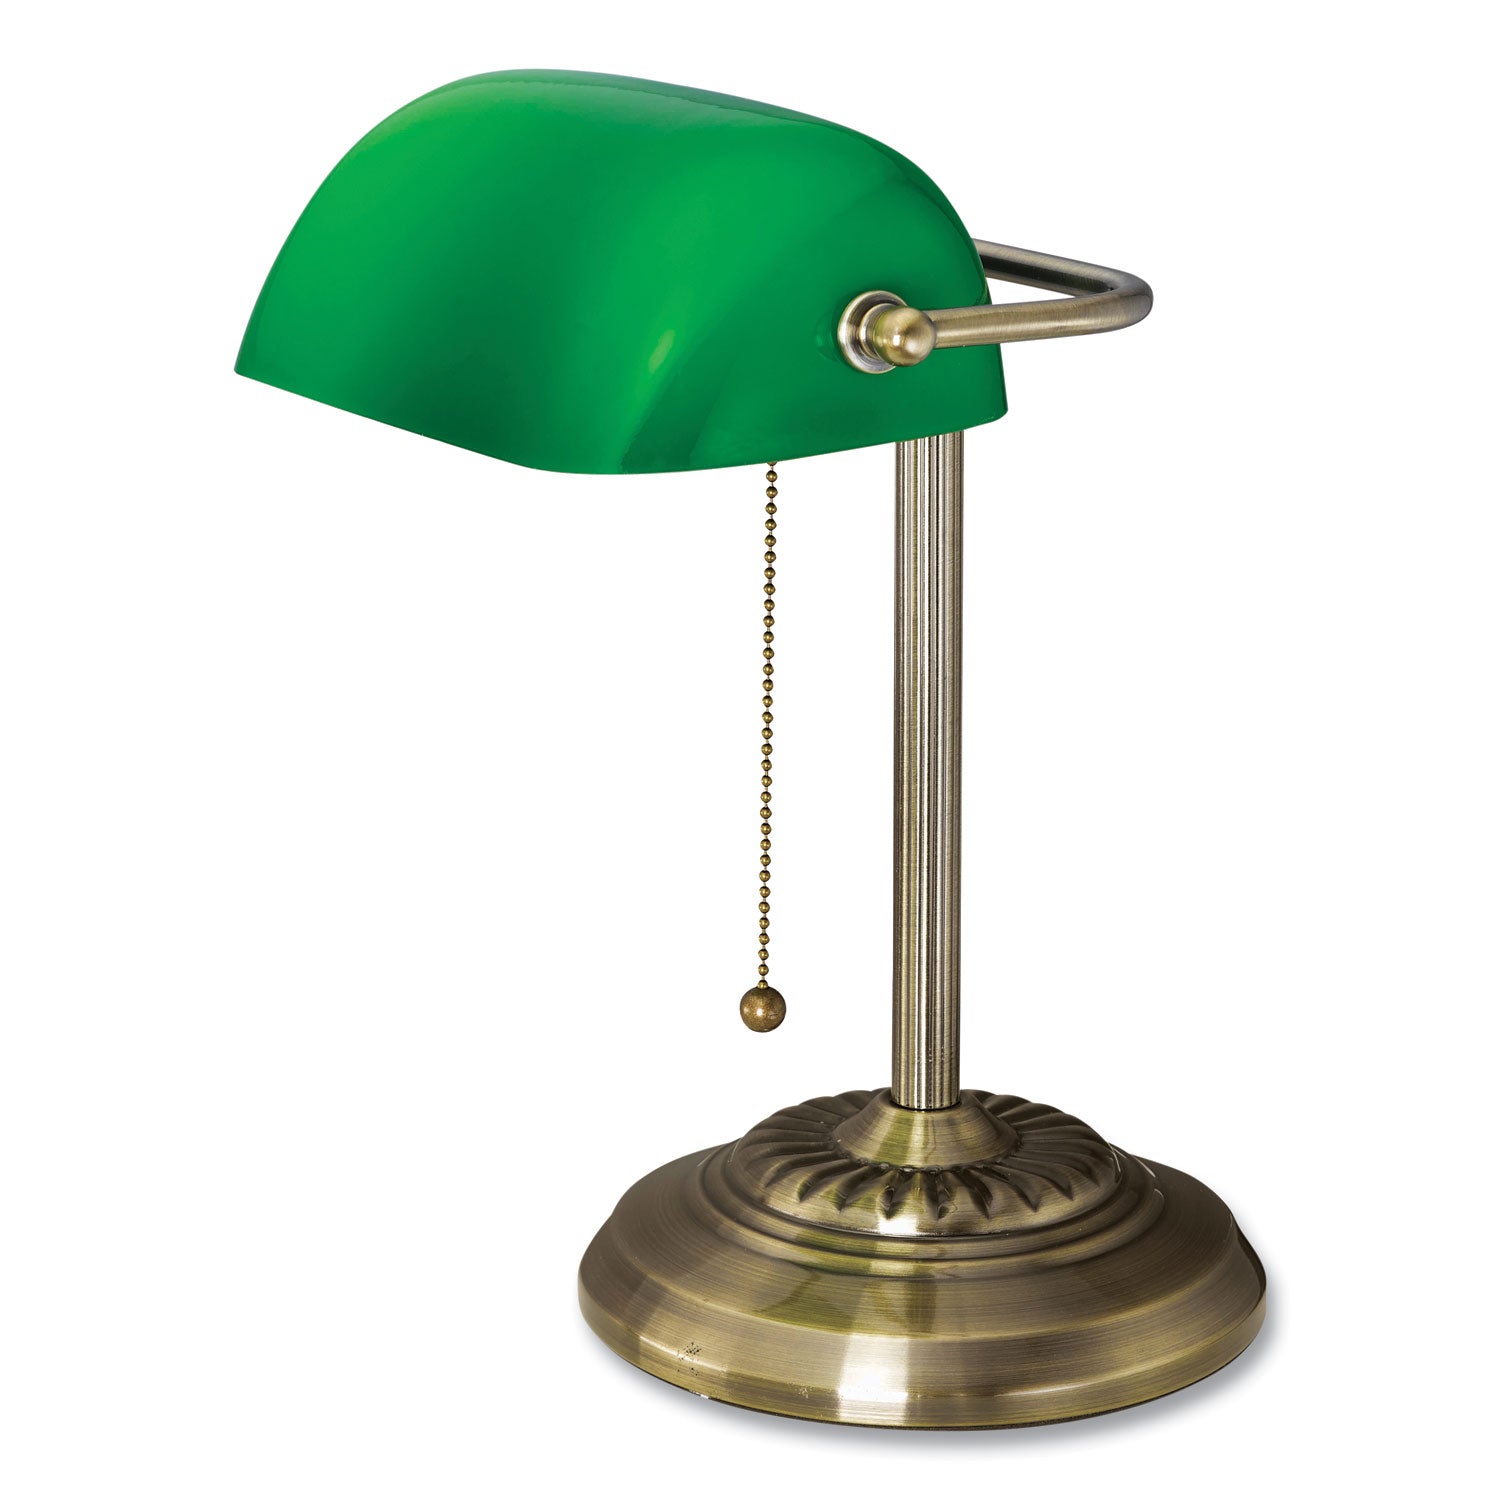 led-bankers-lamp-with-green-shade-cable-suspension-neck-135-high-antique-brass-ships-in-4-6-business-days_vlu9b101ab - 2